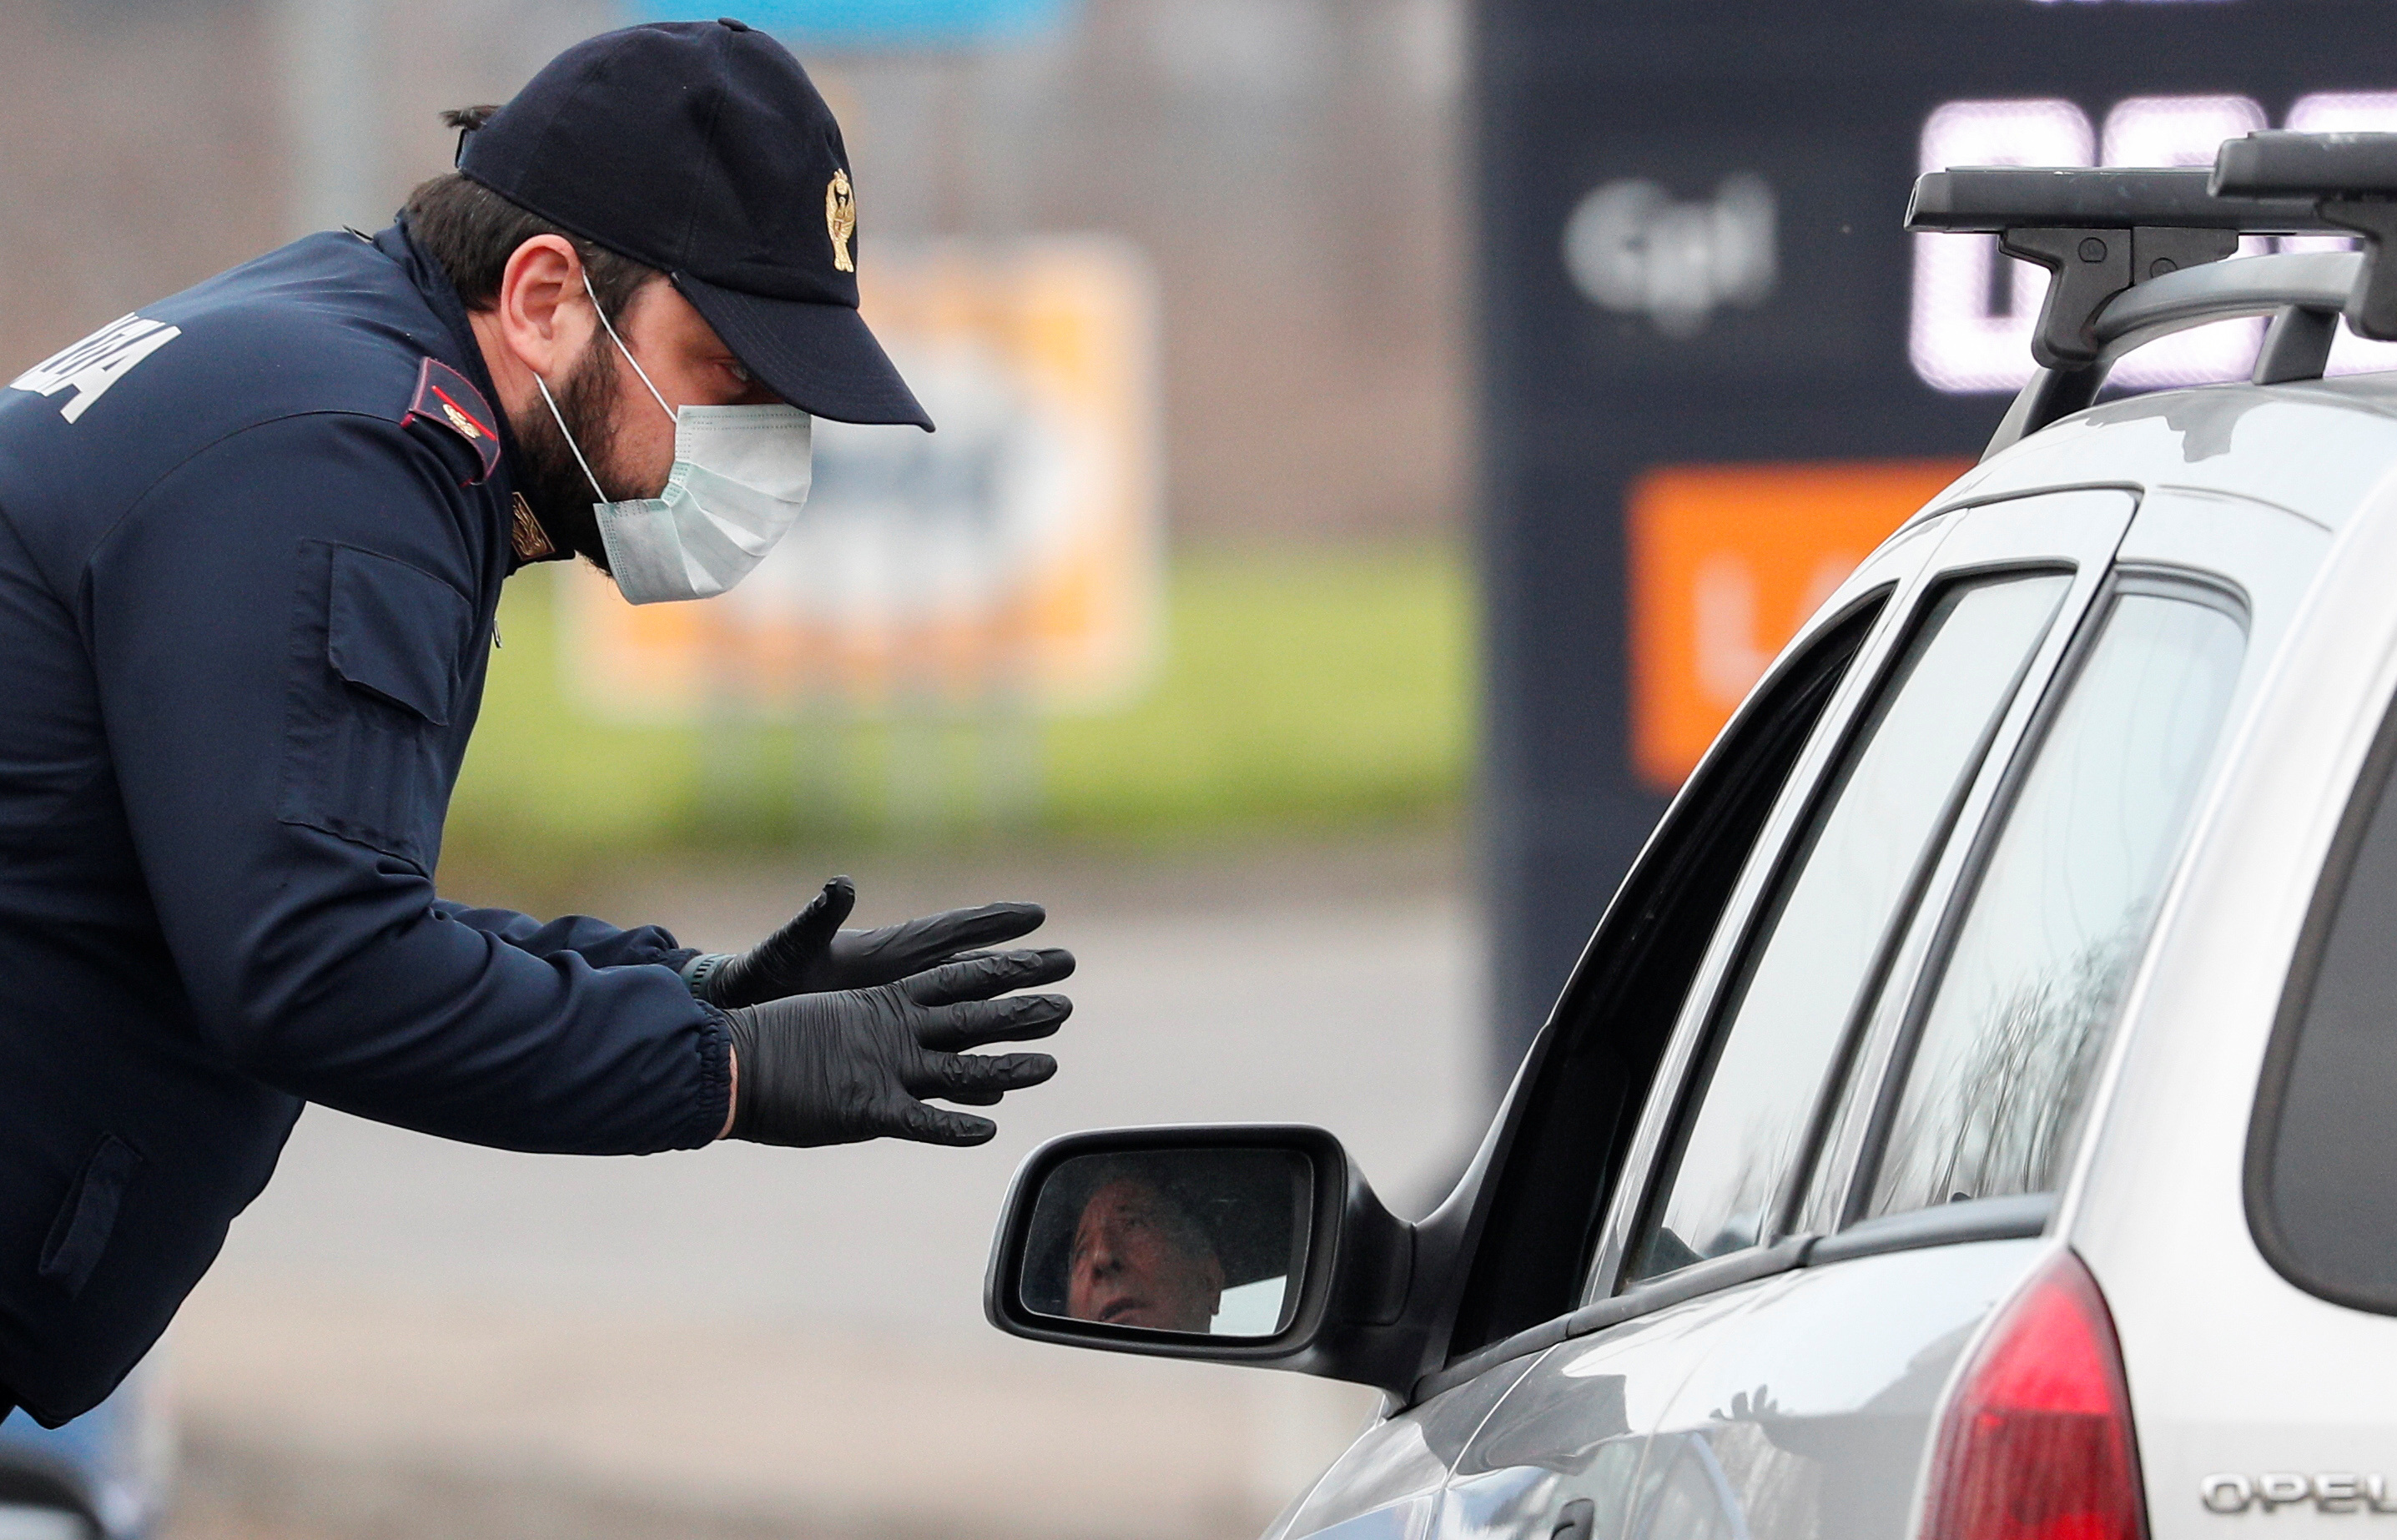 A policeman wearing a face mask warns a driver on the road between Codogno and Casalpusterlengo, which has been closed by the Italian government due to a coronavirus outbreak in northern Italy